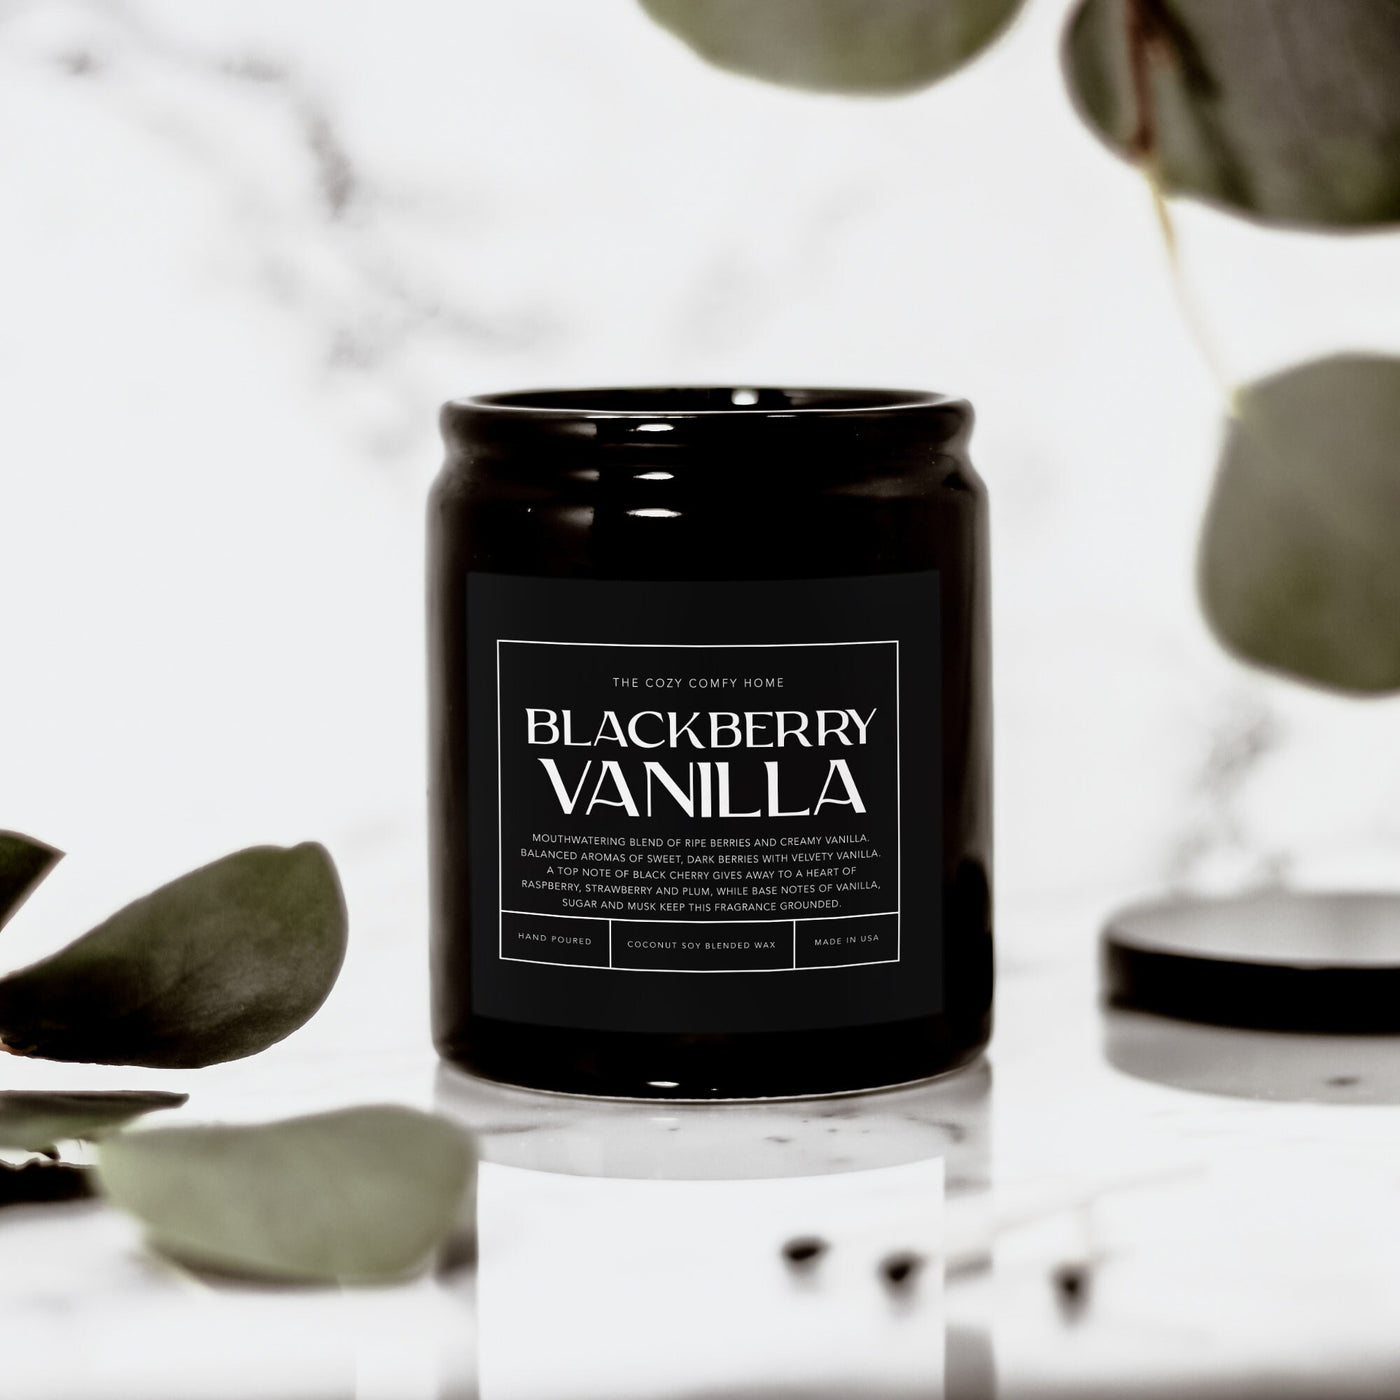 Blackberry Vanilla hand poured candle, Scented Nontoxic Candle, 8 oz coconut soy wax candle, Black or White ceramic jar, Wholesale Available